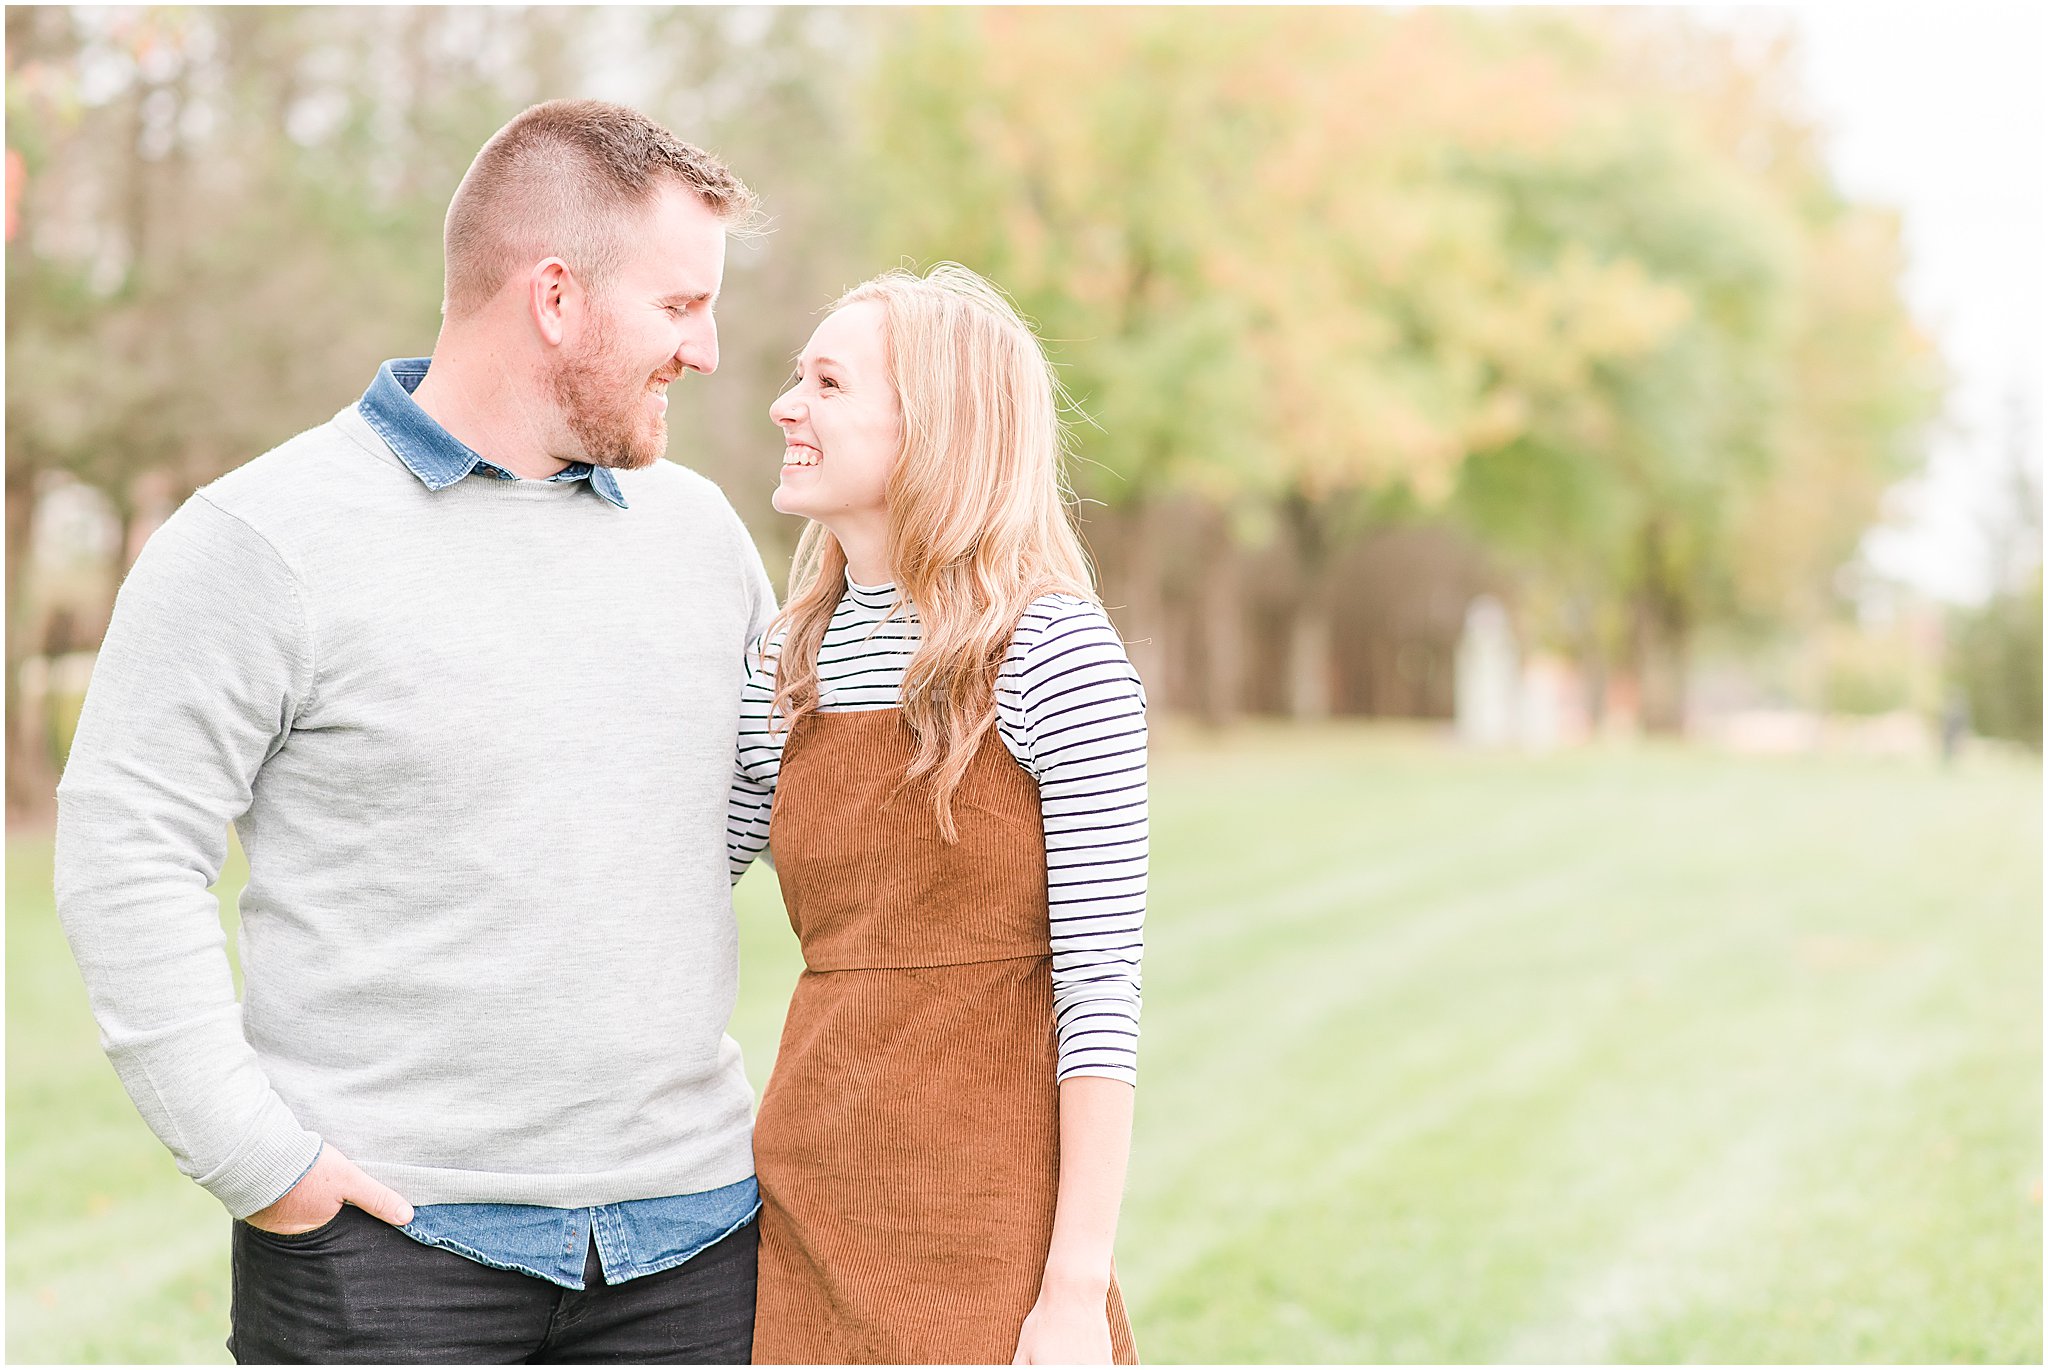 Man and woman smiling at each other during Coxhall Gardens engagement session